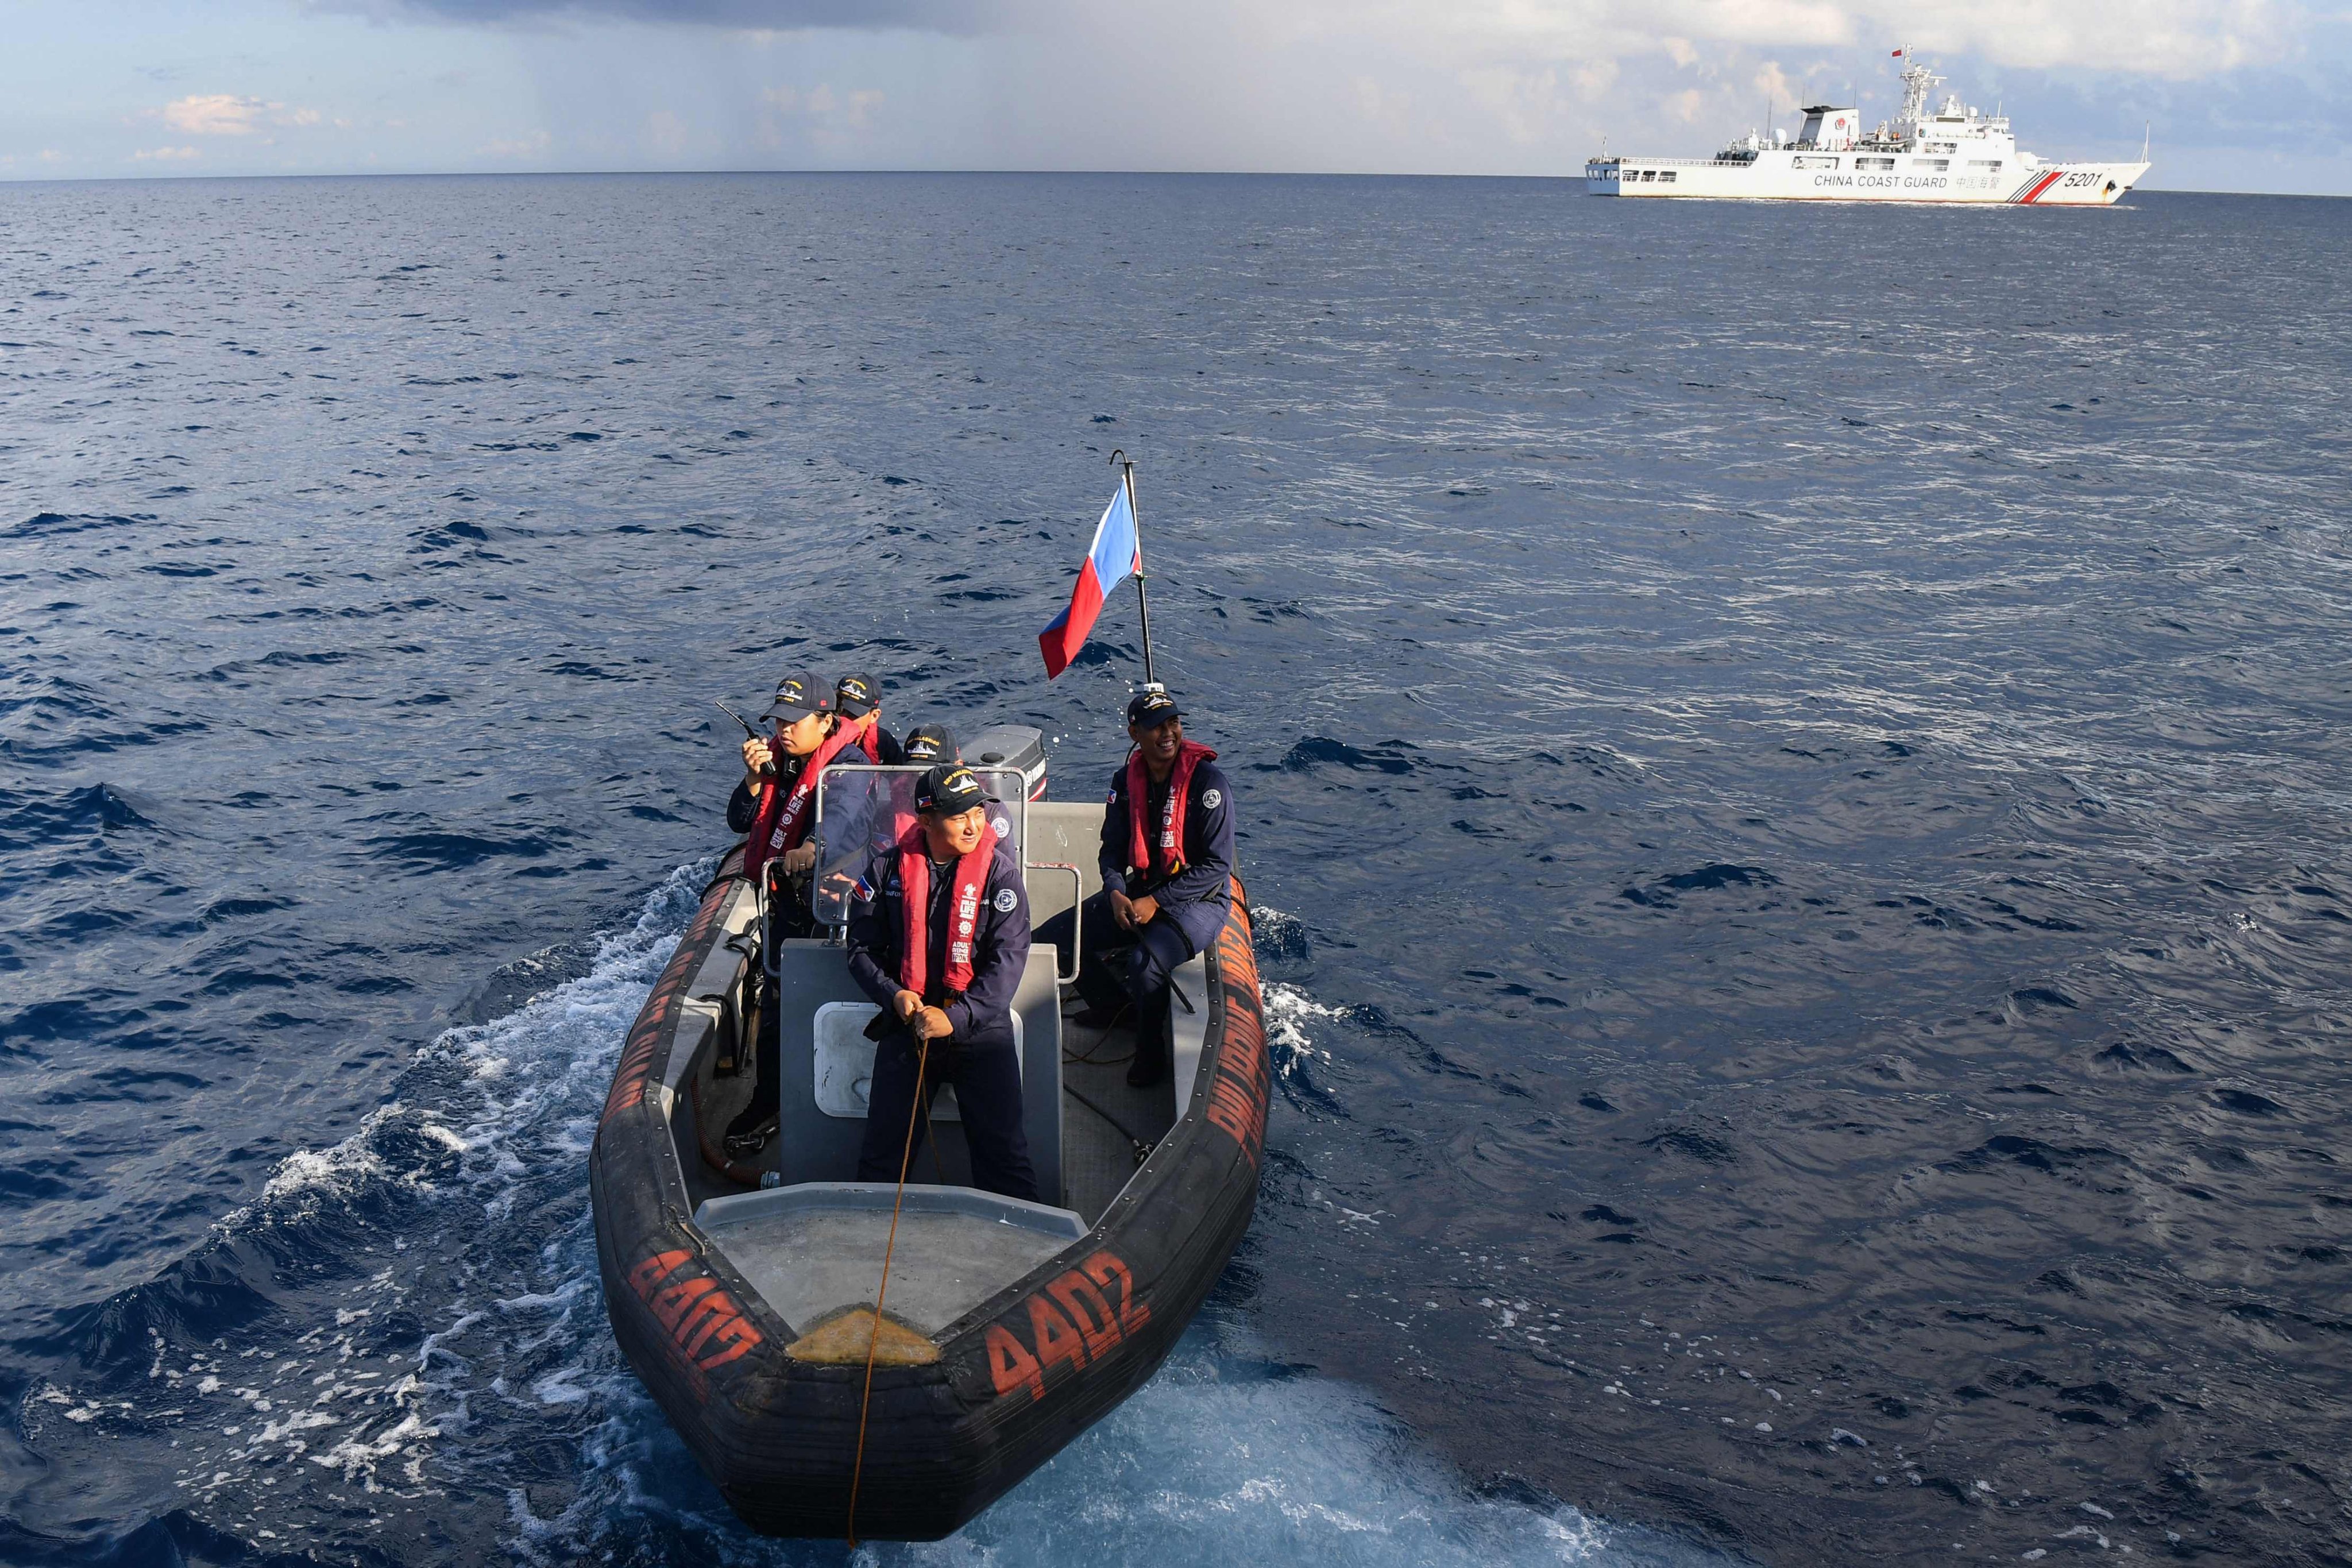 A Philippine coastguard vessel conducts a survey in the waters of Second Thomas shoal in the Spratly Islands in the disputed South China Sea. Photo: AFP